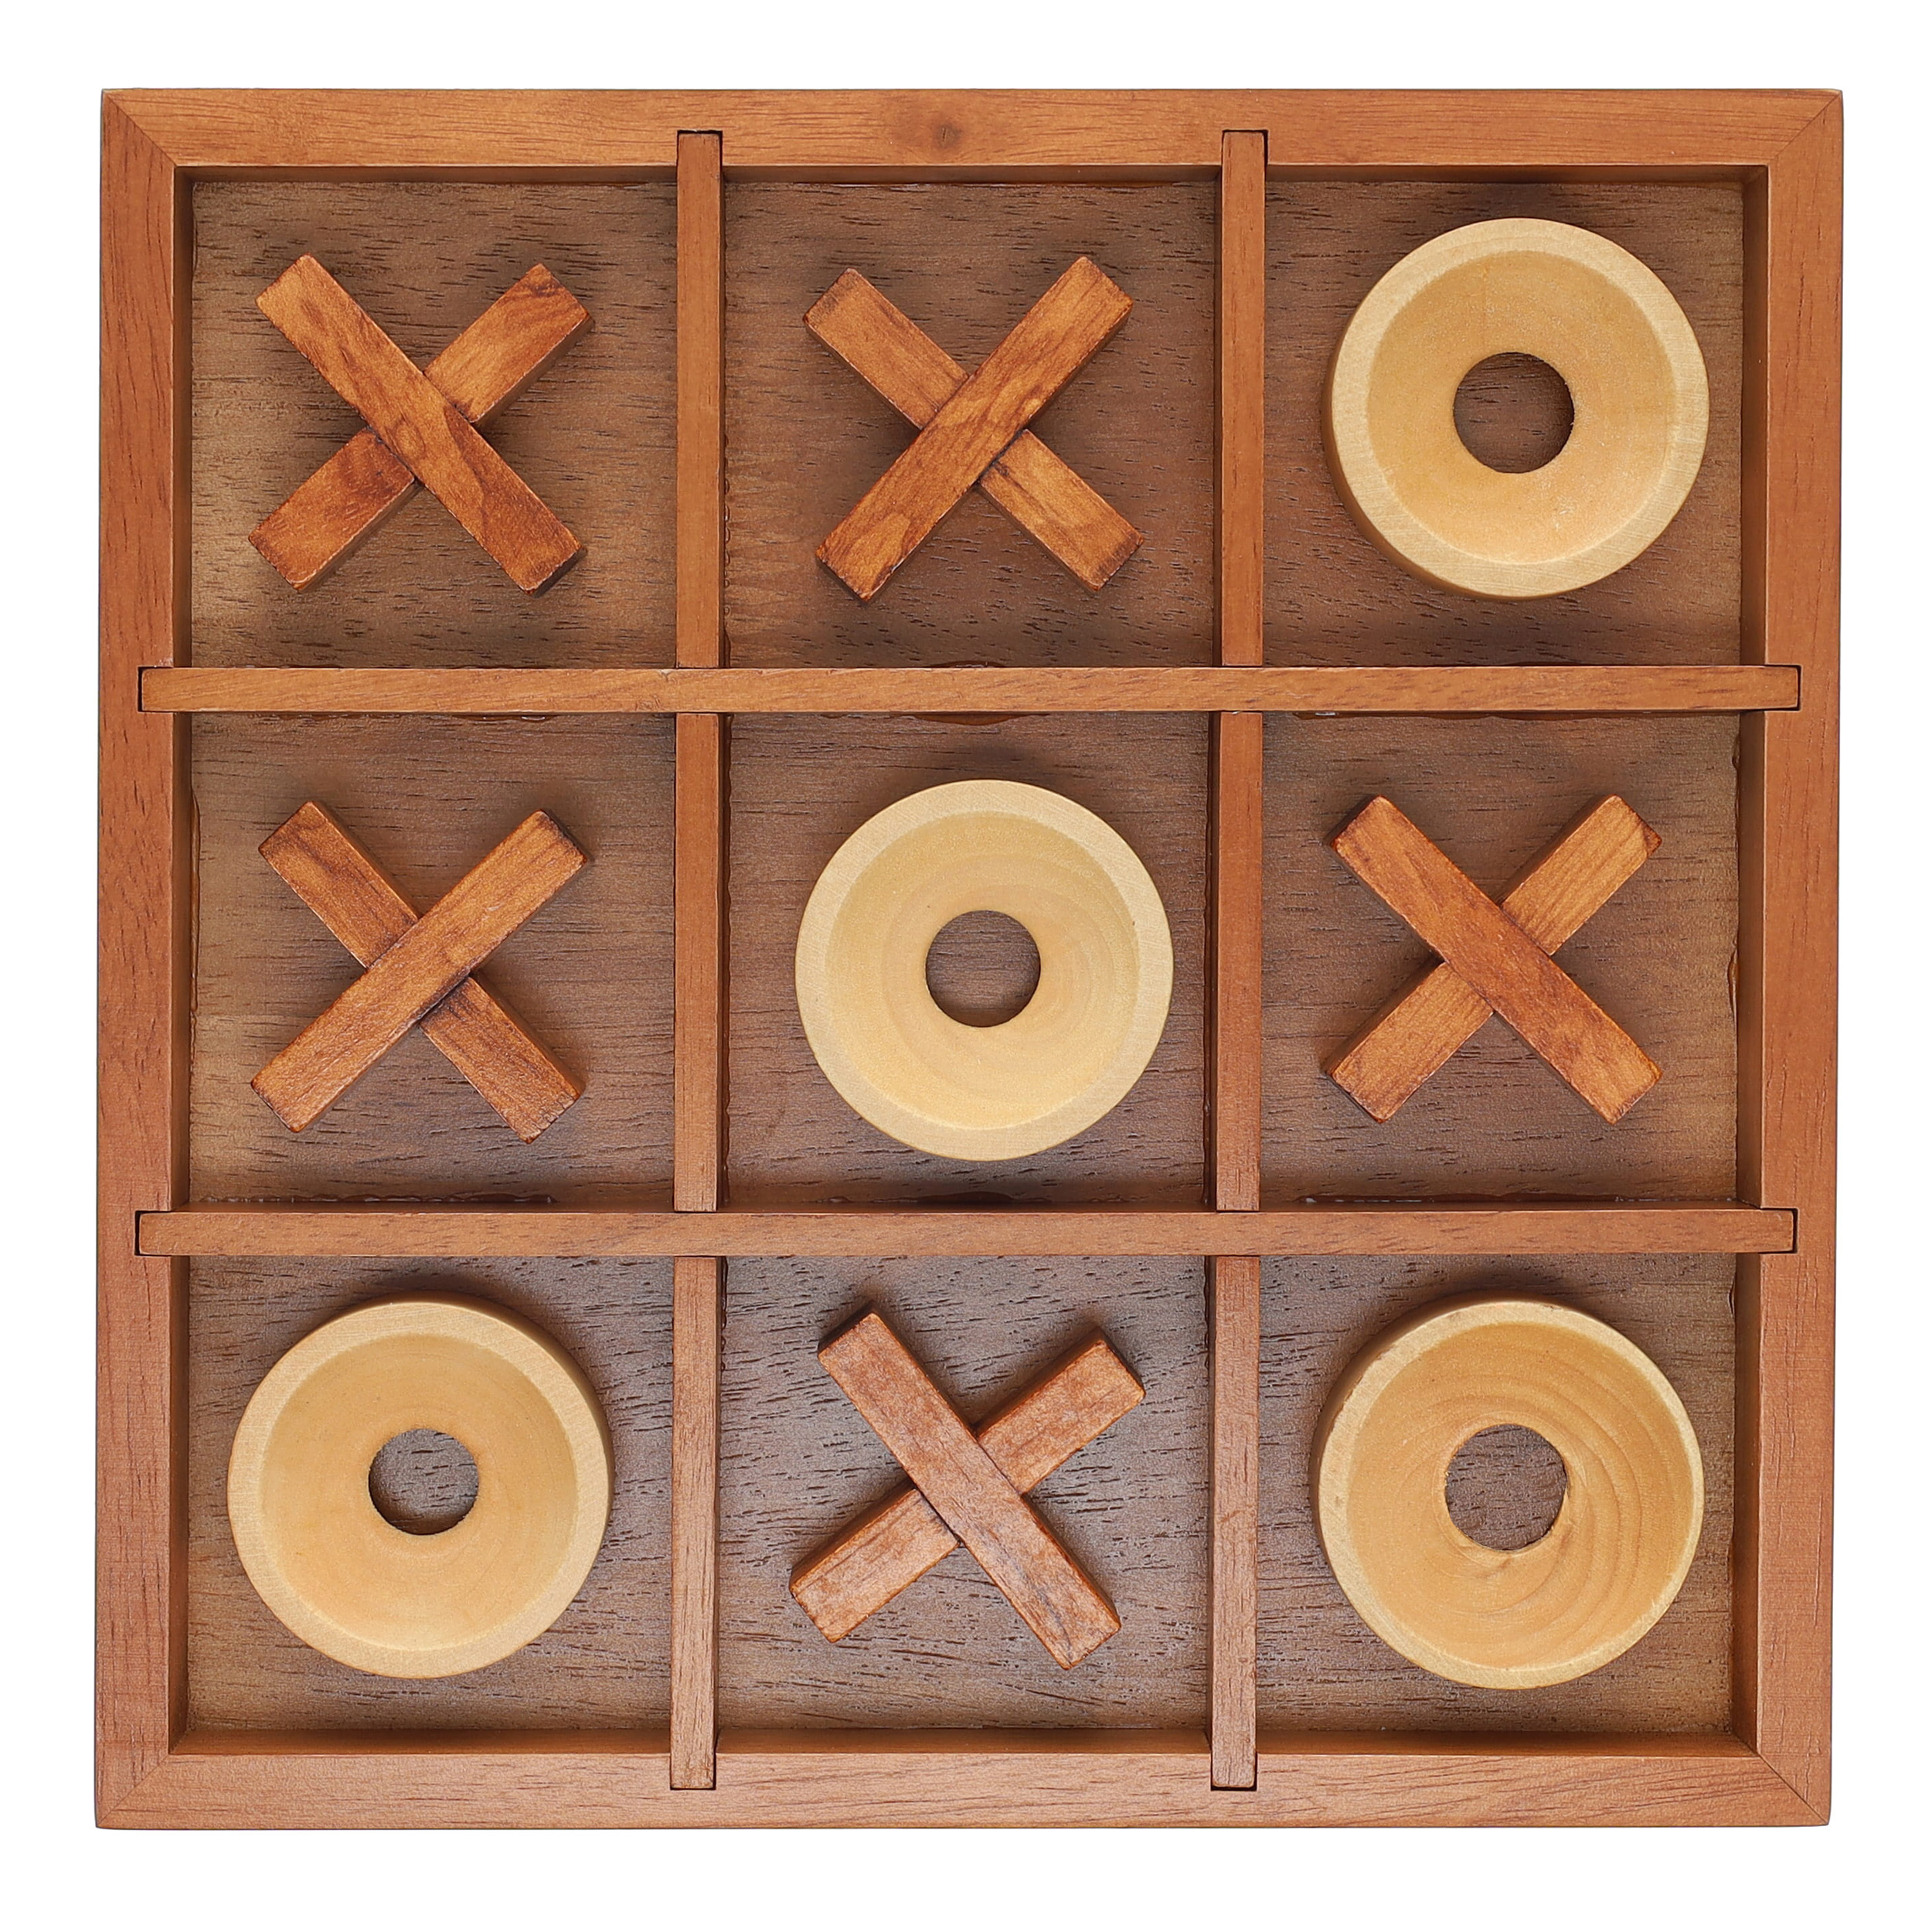 Tic Tac Toe - 2 Player Games by Funny Puzzle